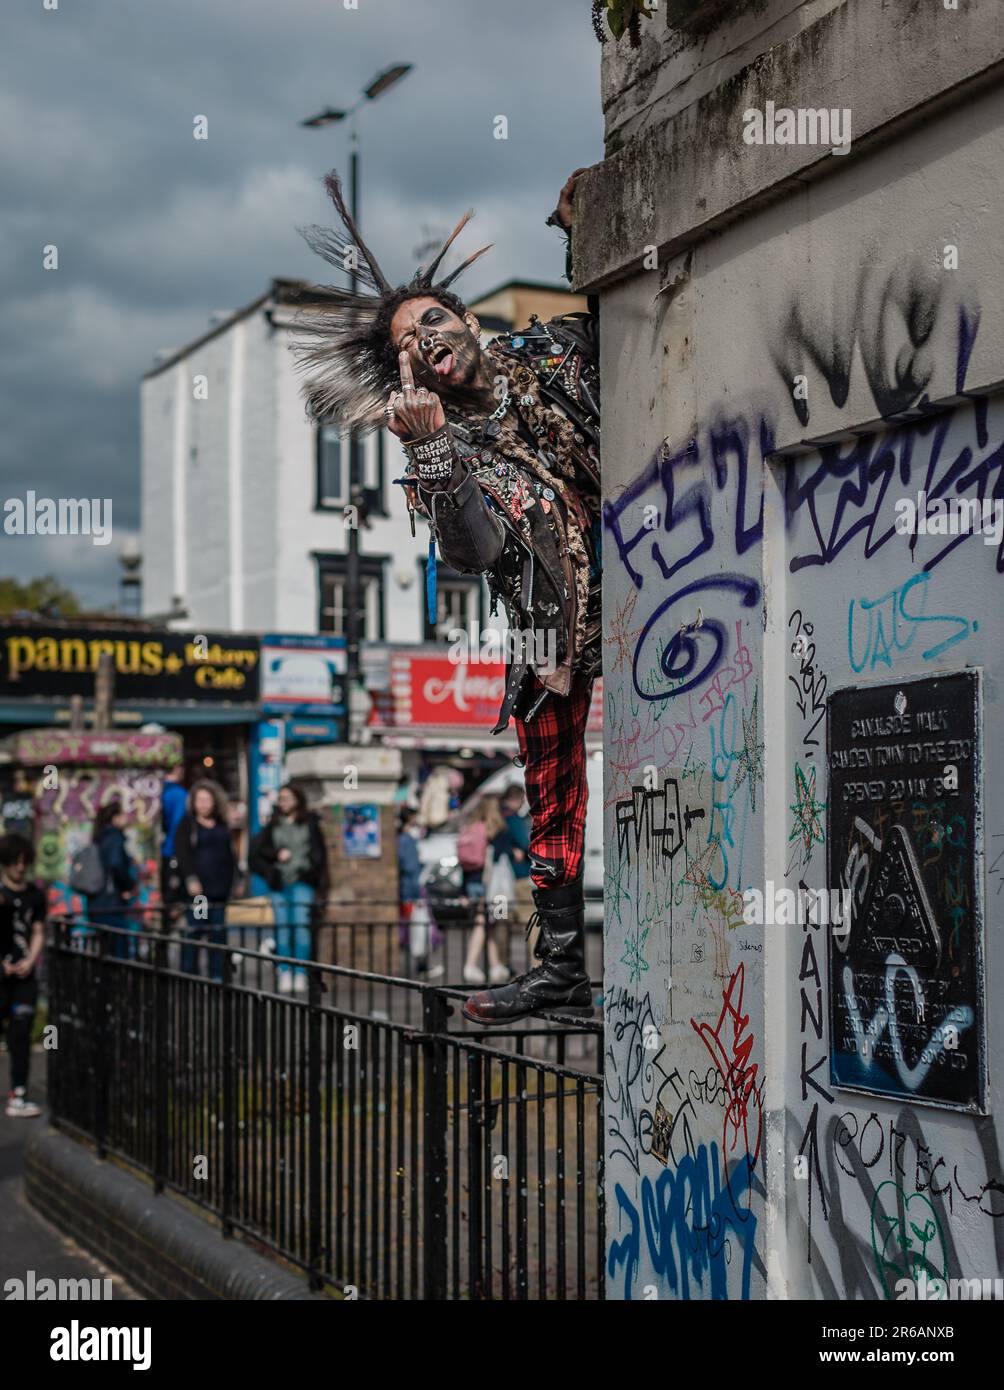 Zombie Punk in Camden salutes his adoring fans. Stock Photo